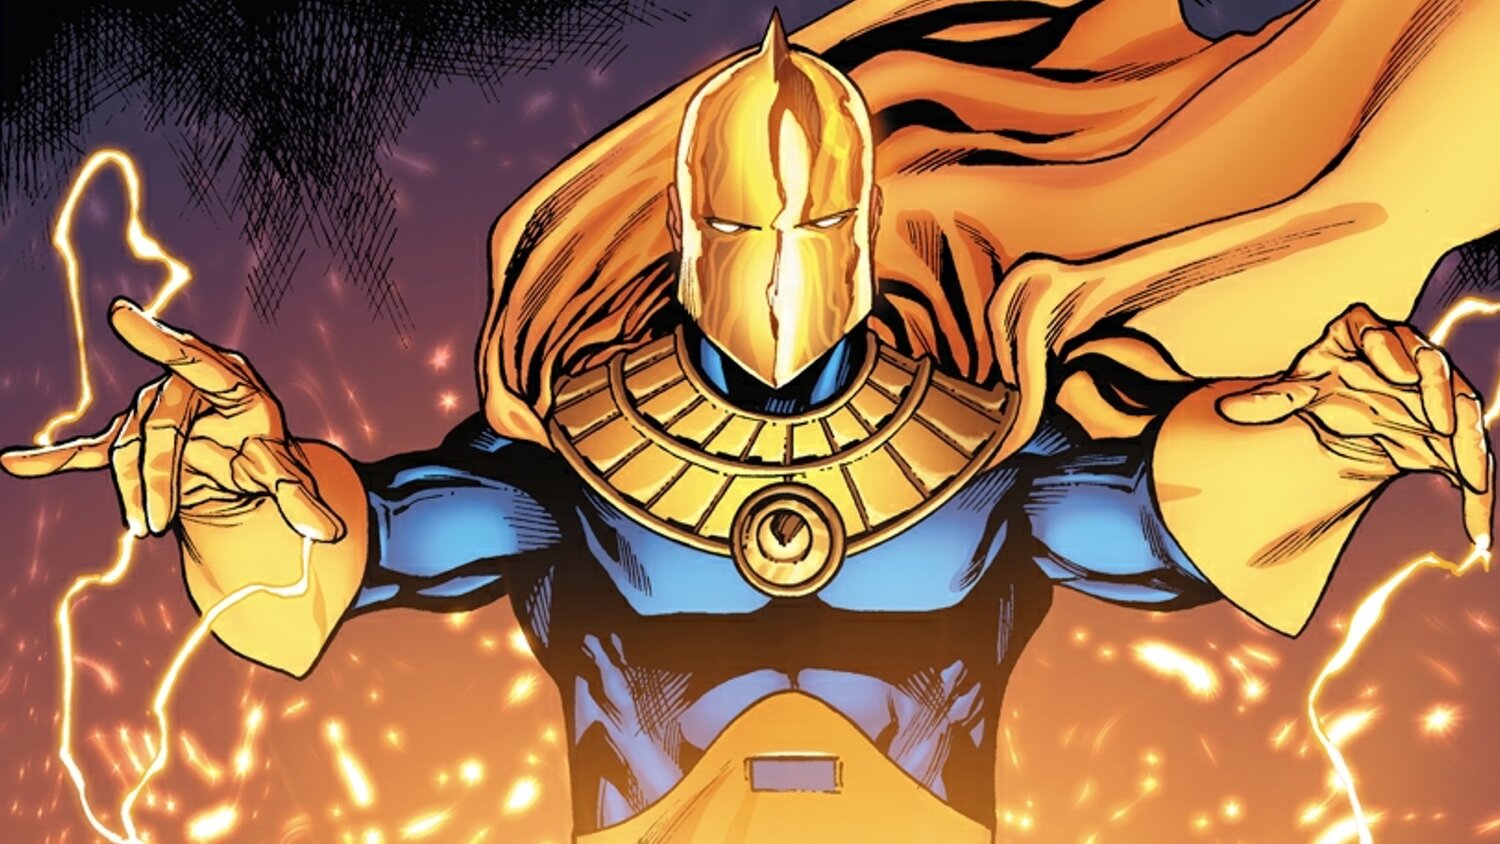 Doctor Fate in the comics.